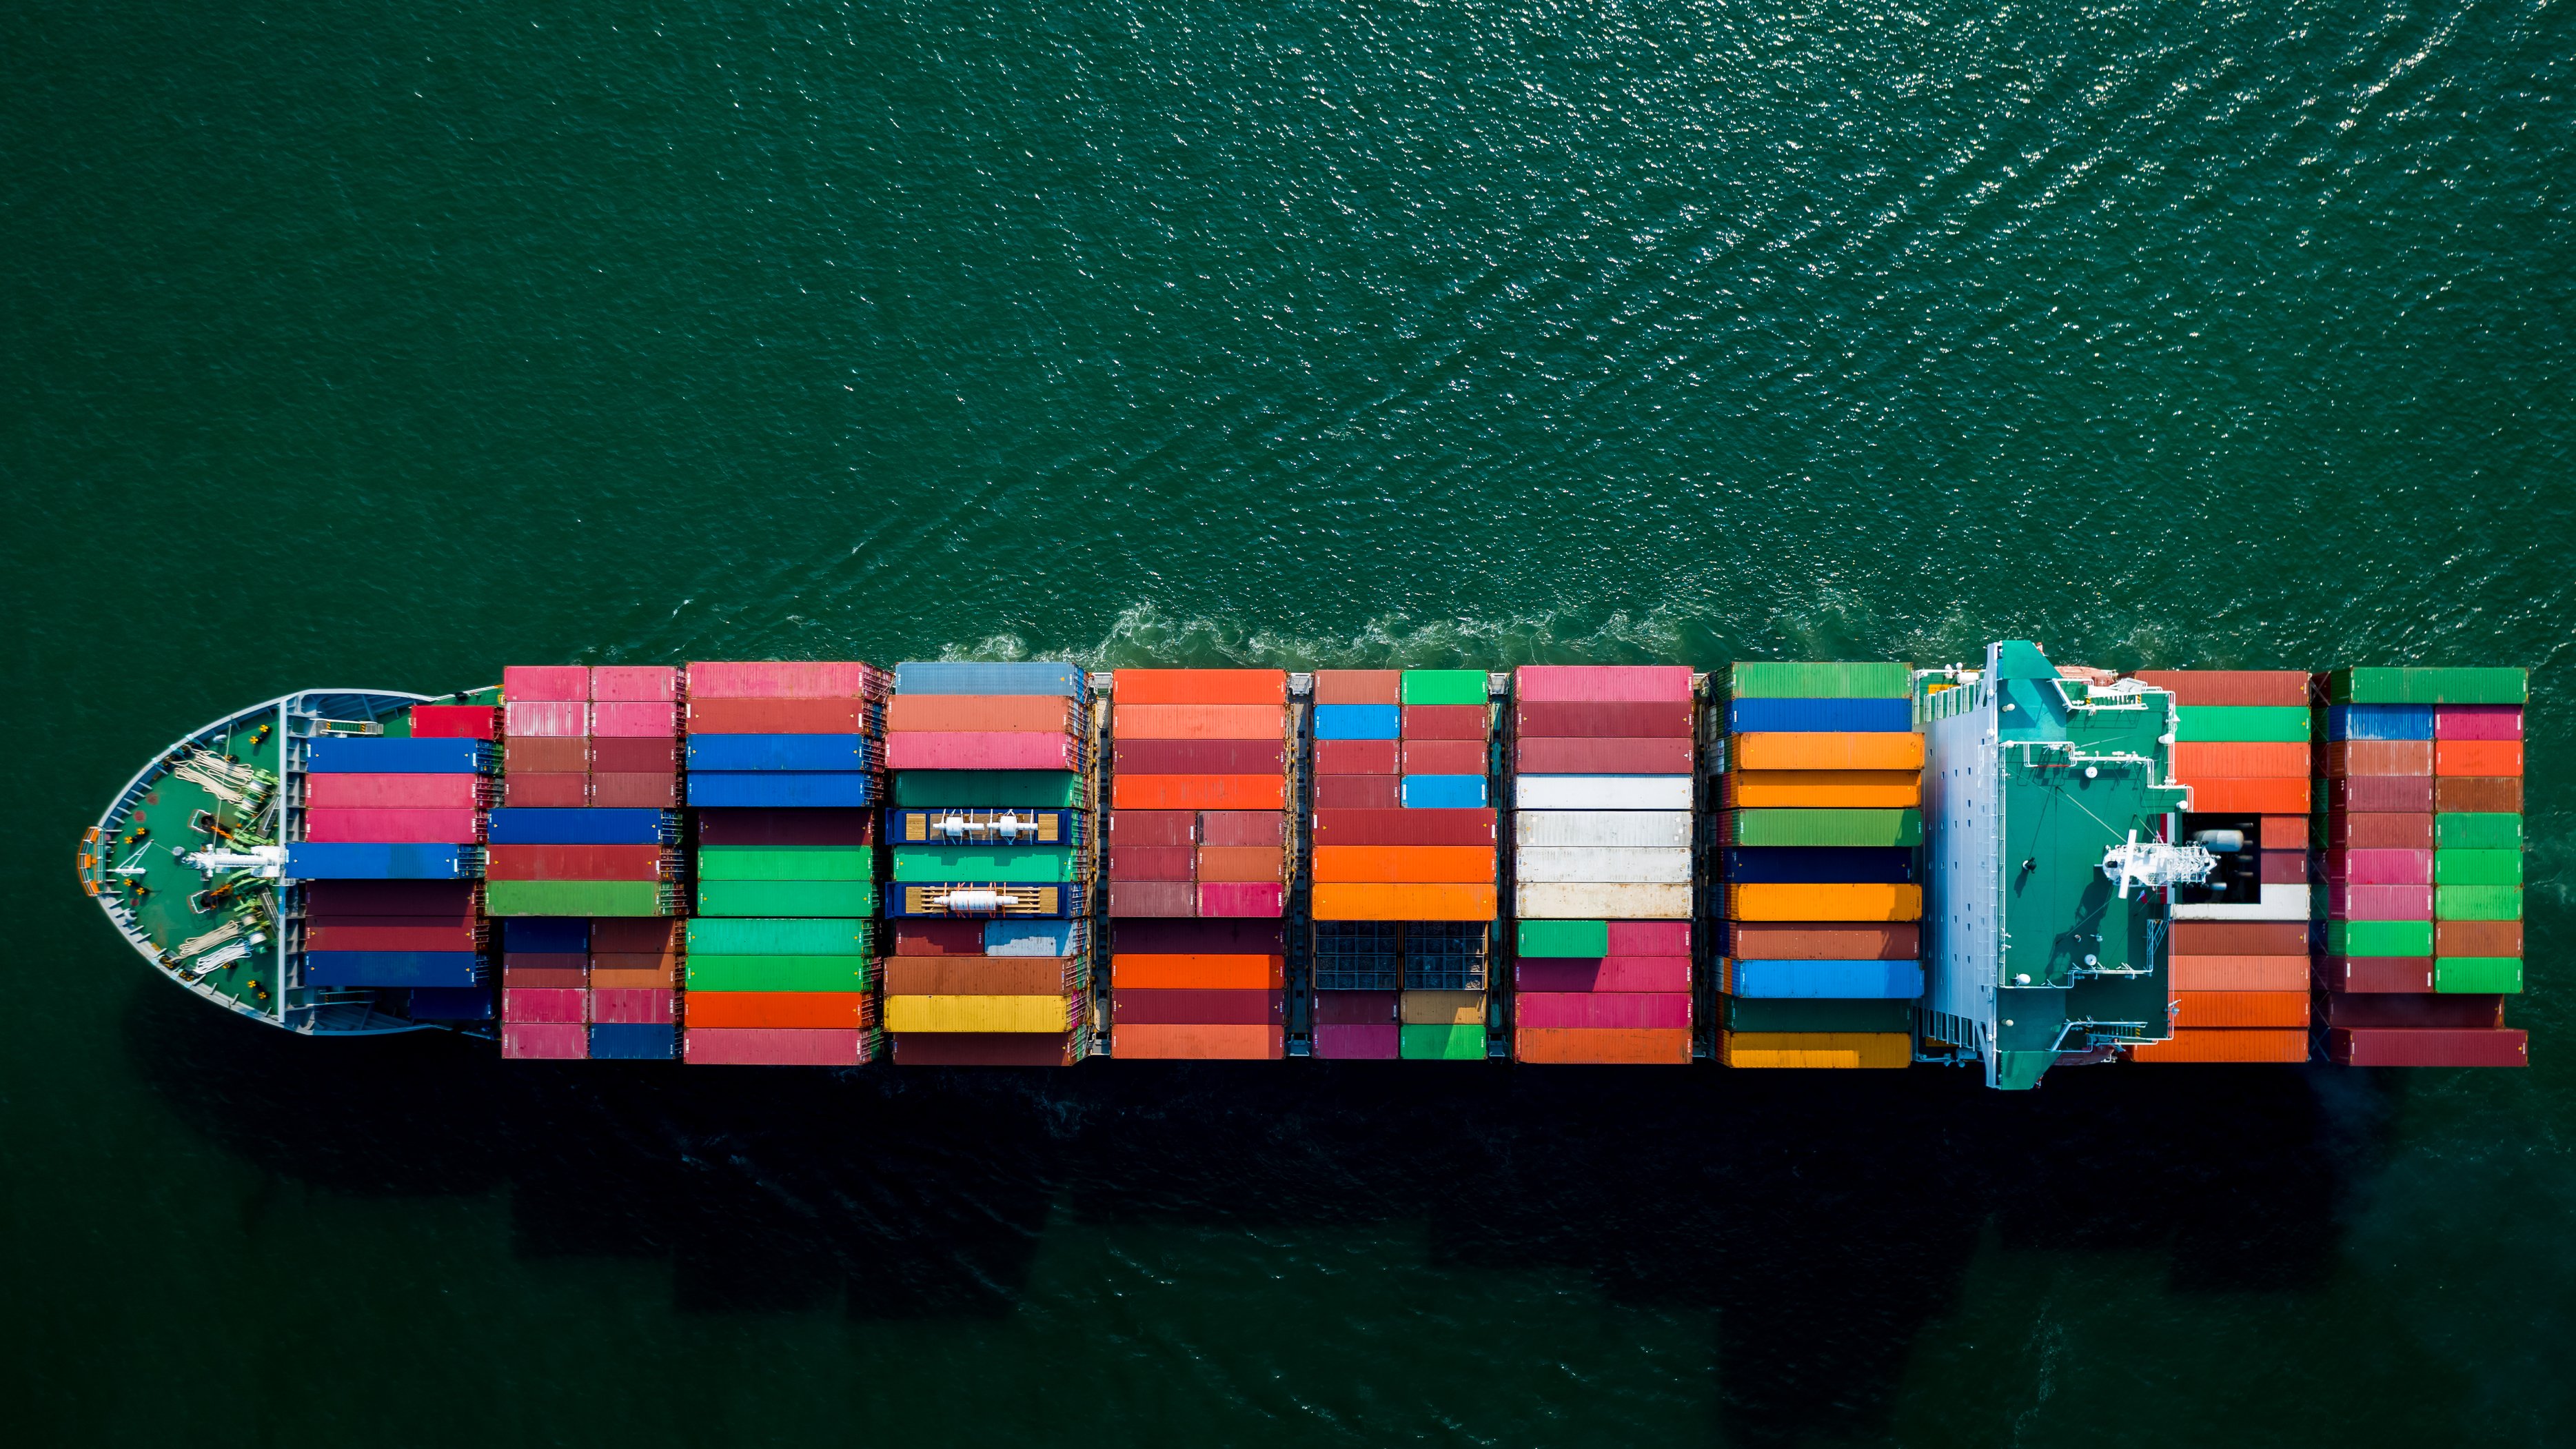 Ocean Freight costs are finally on trend to normalize